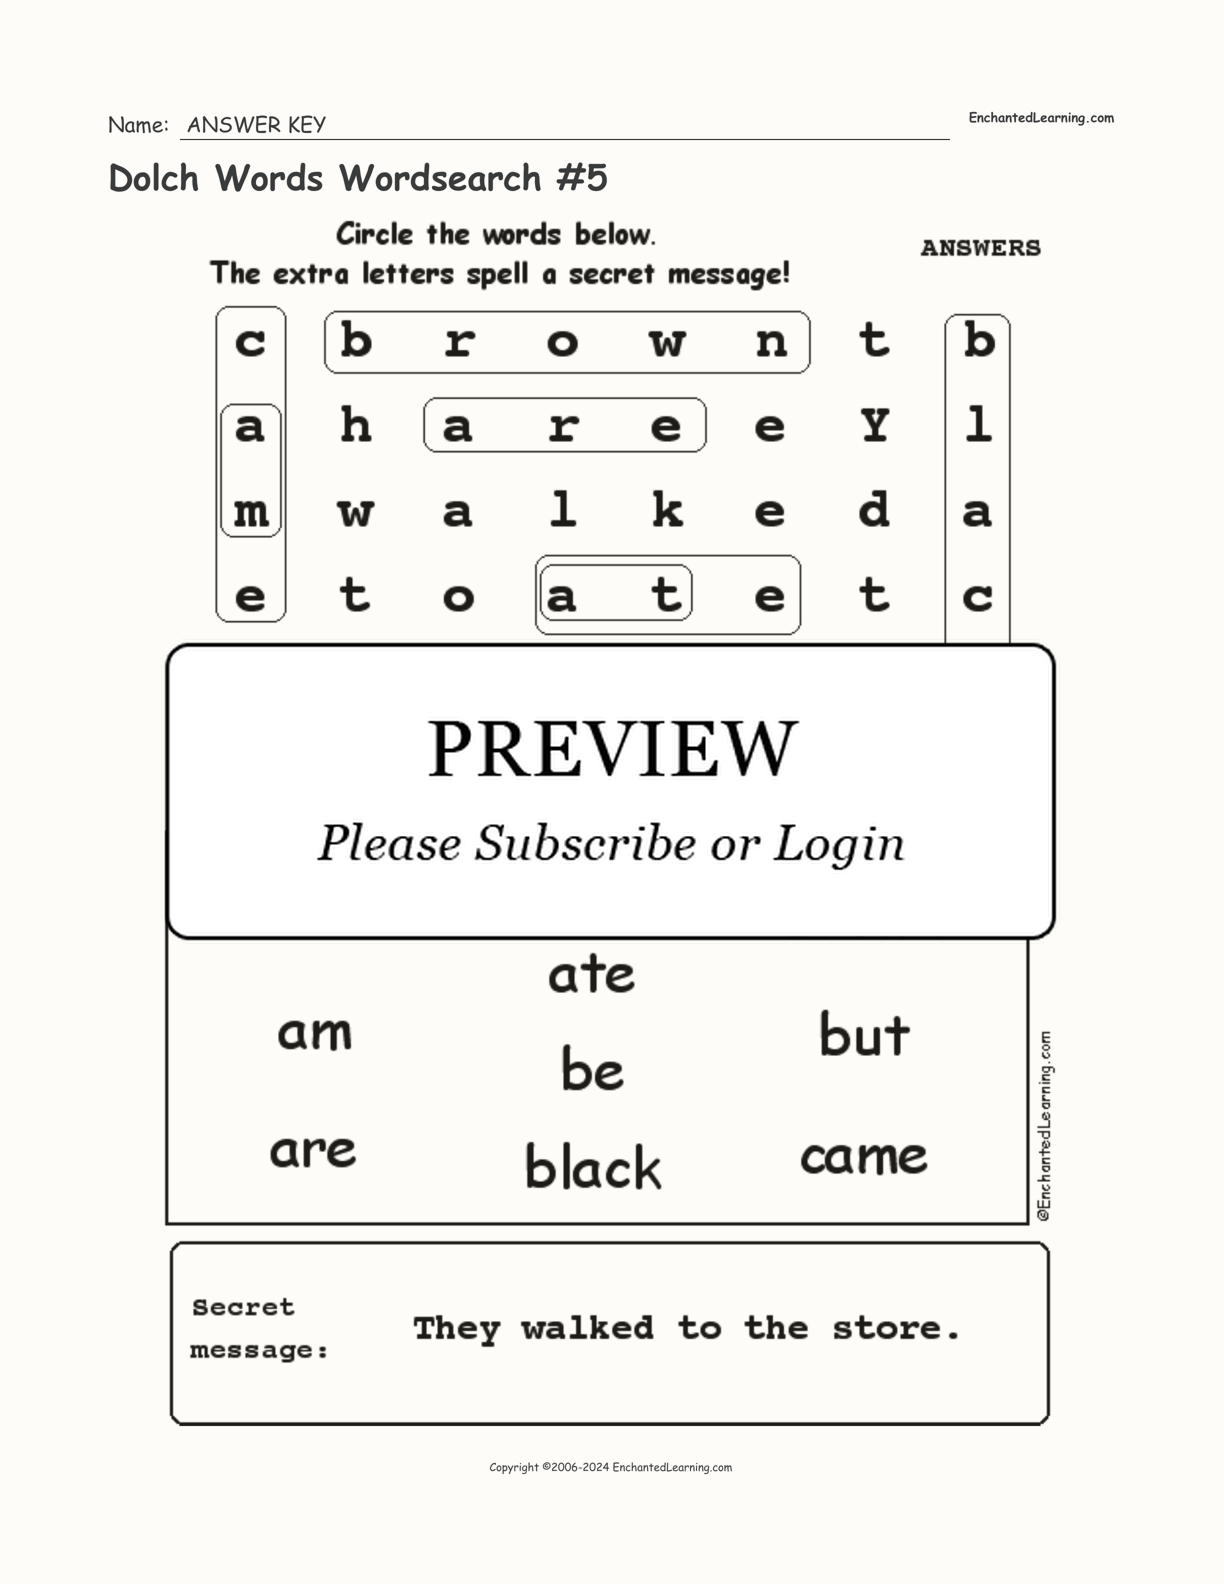 Dolch Words Wordsearch #5 interactive worksheet page 2